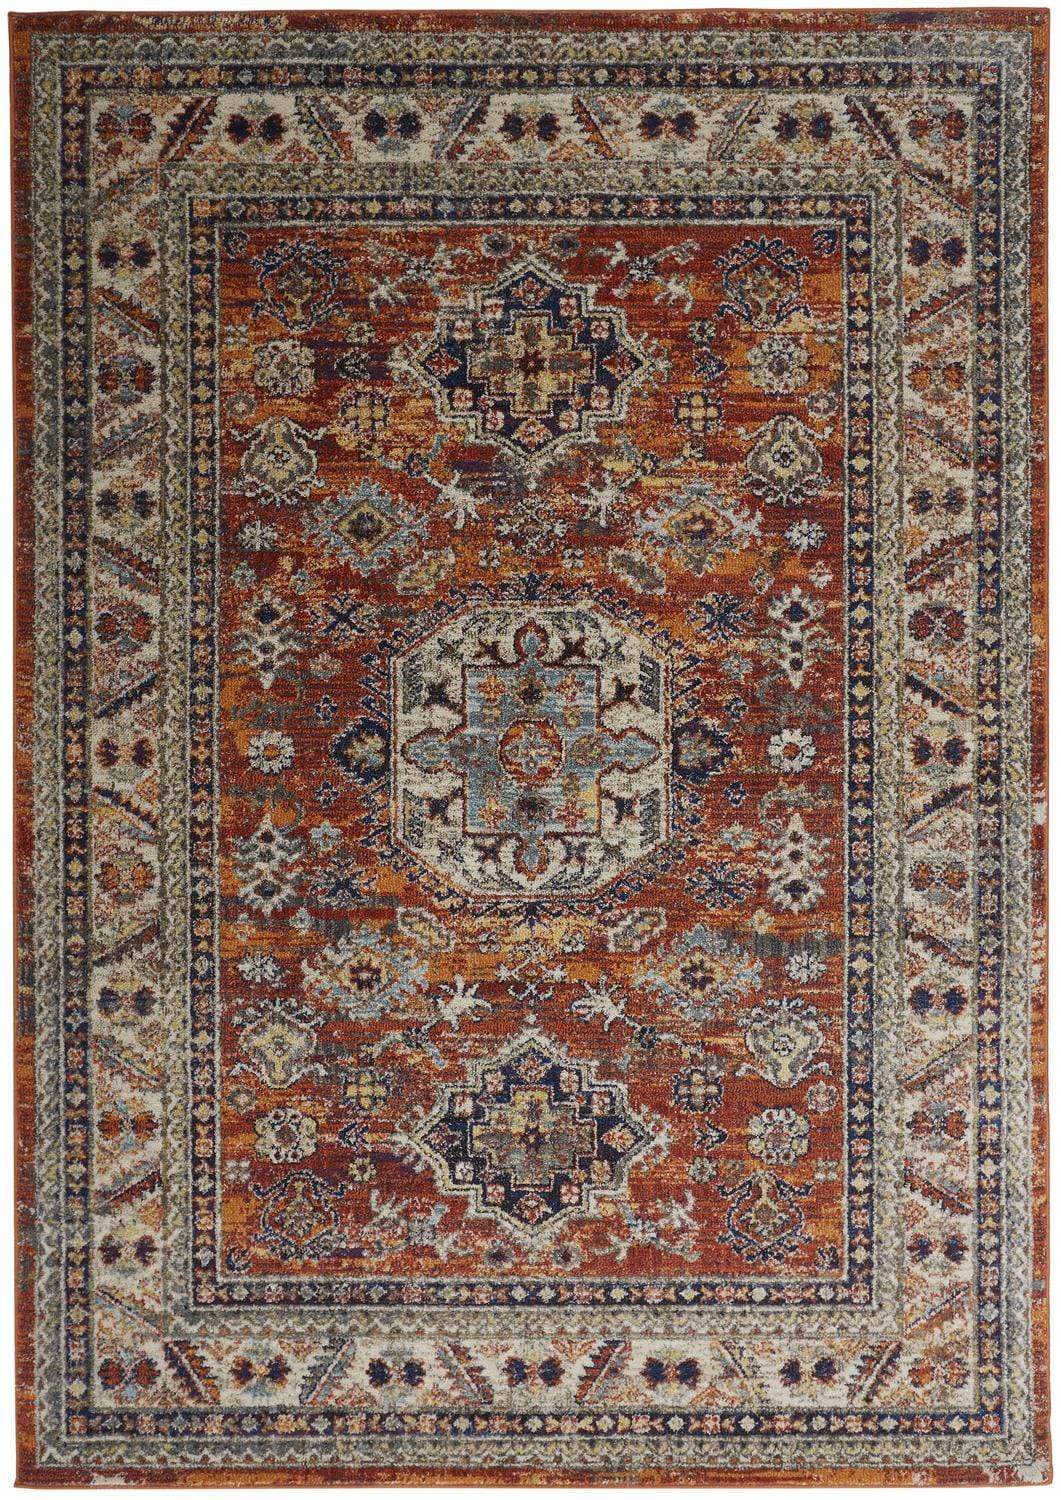 Feizy Feizy Bellini Vintage Bohemian Rug - Rust Orange & Blue - Available in 7 Sizes 5'-3" x 7'-6" I78I3136ORNMLTE76